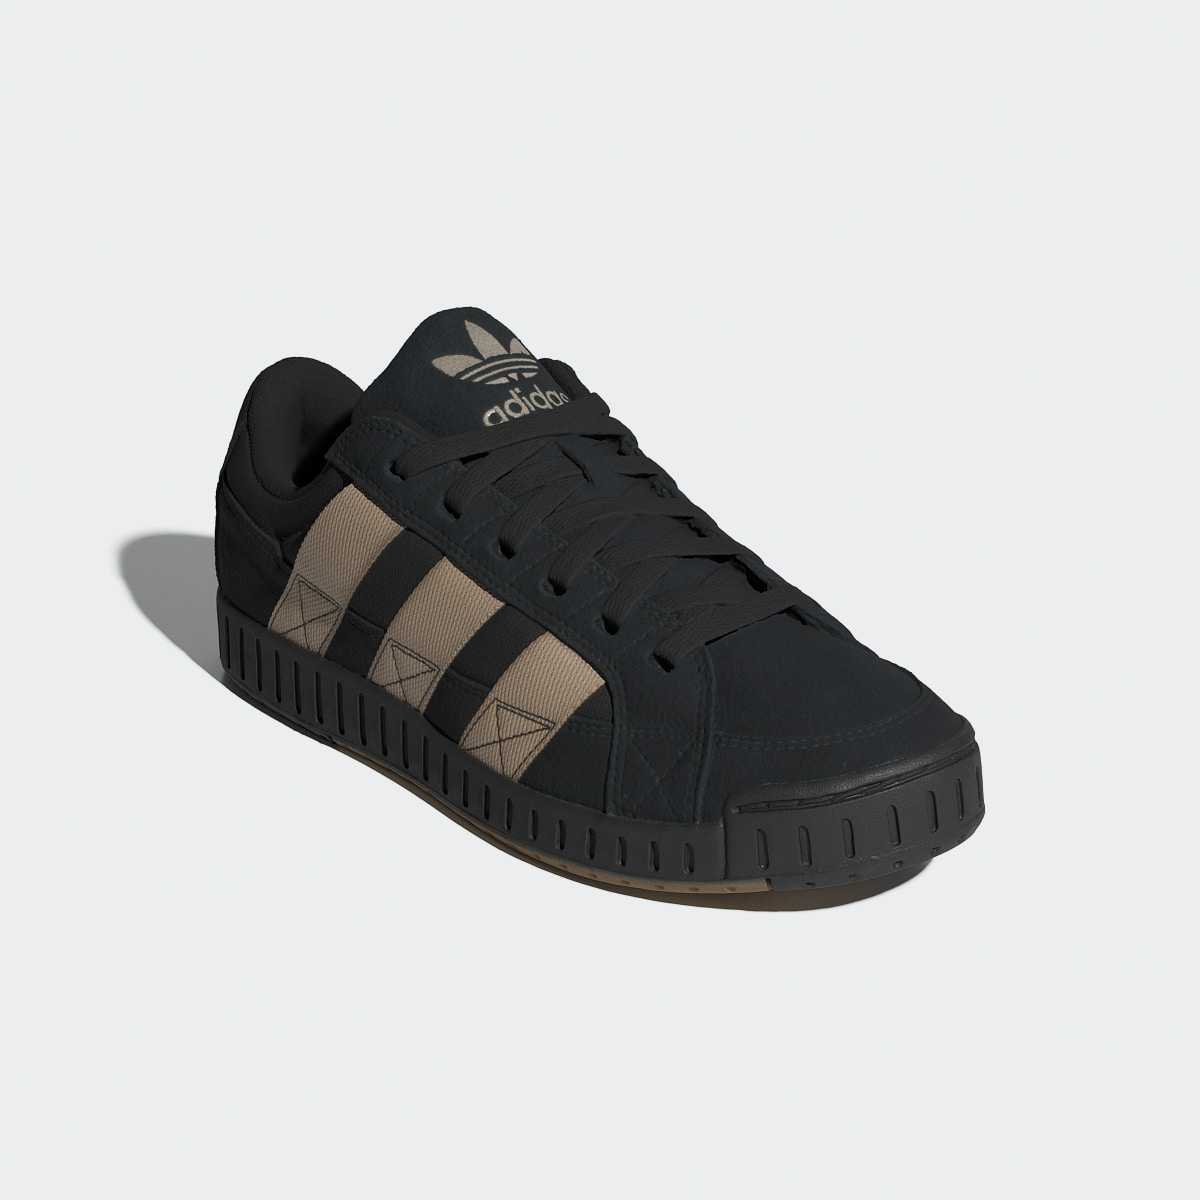 Adidas Chaussure LWST. 5